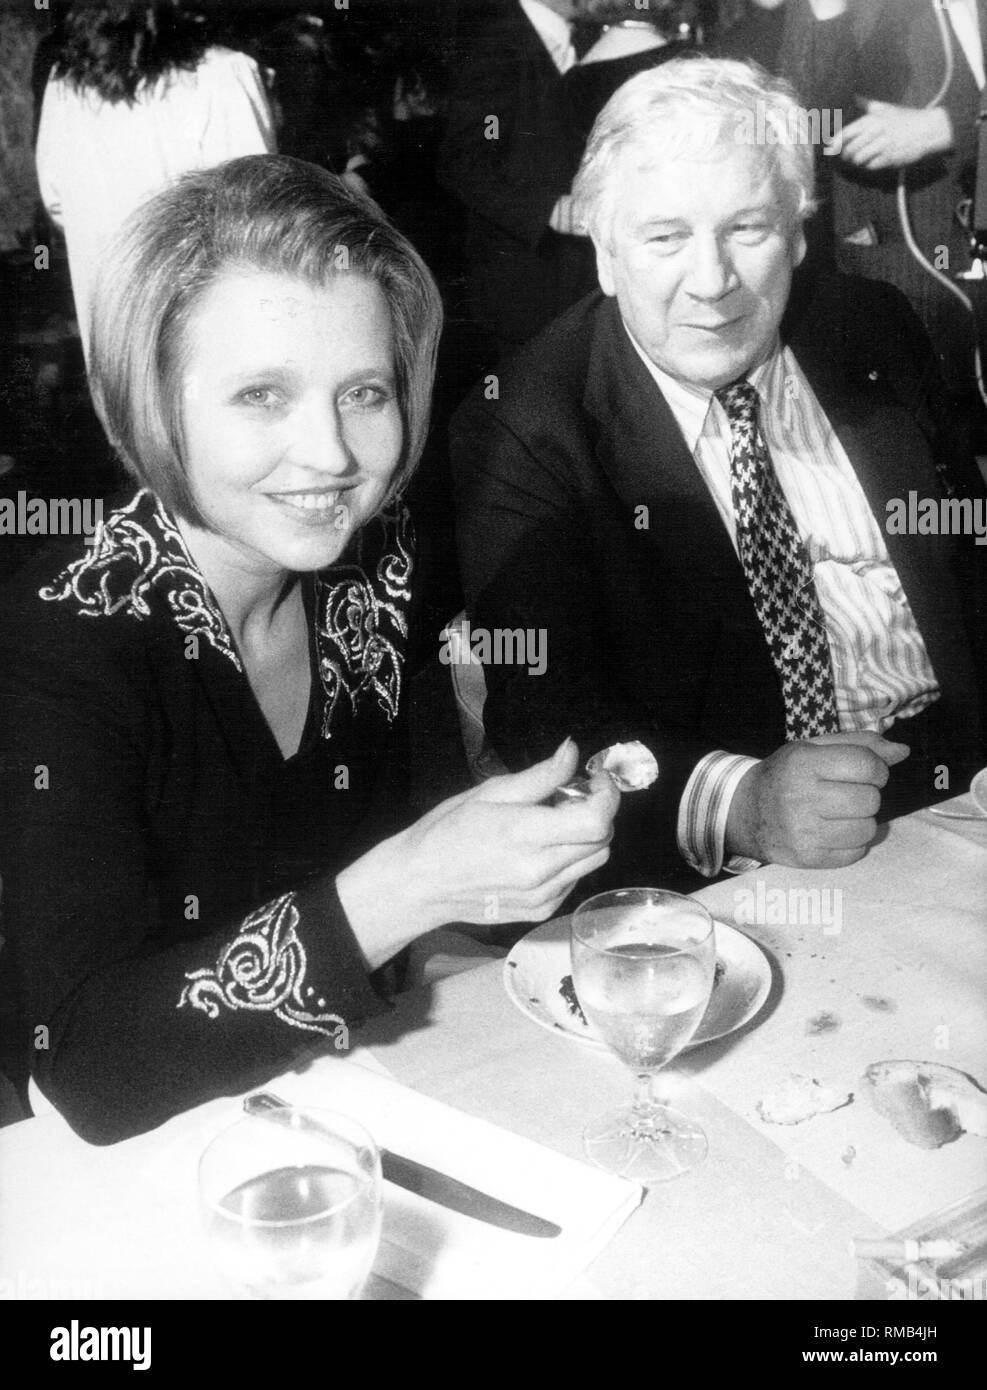 Hanna Schygulla and the British actor Peter Ustinov at the awarding of the 'Golden Camera'. Stock Photo